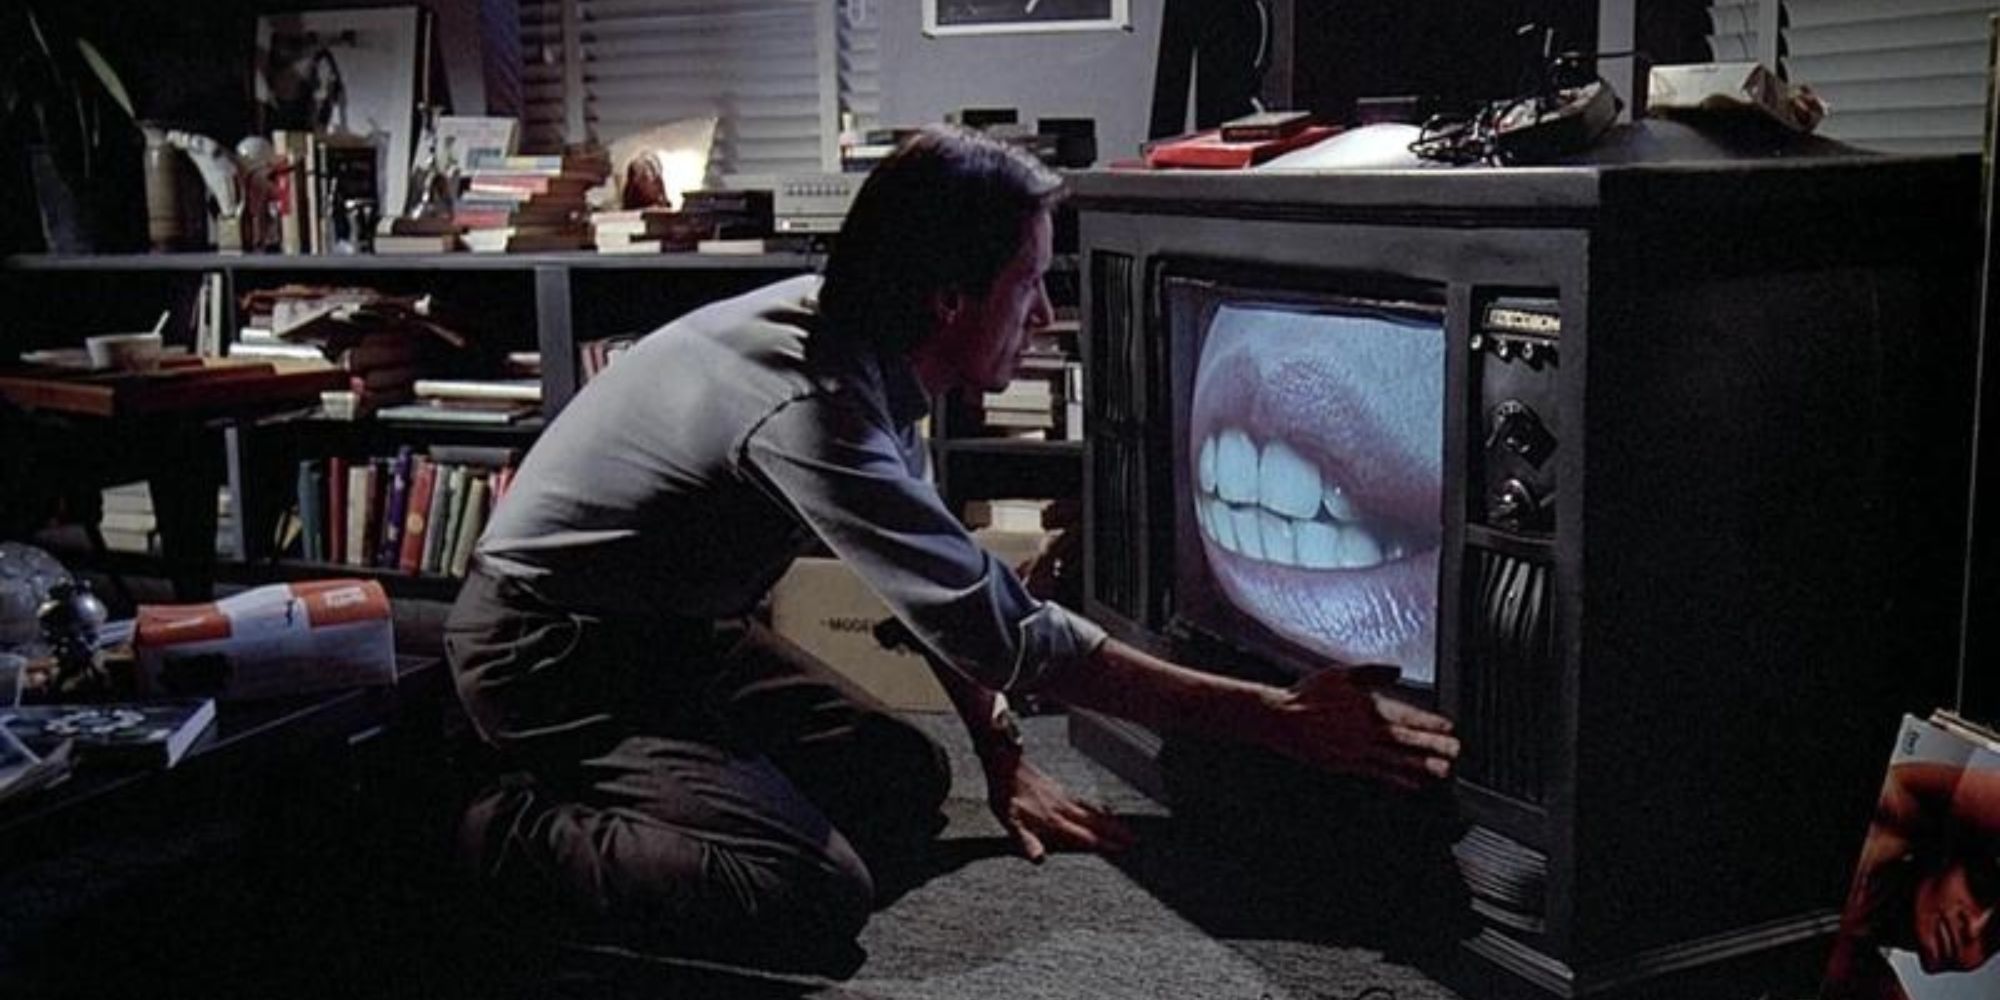 man crouching in front of TV set with an image of a woman's mouth